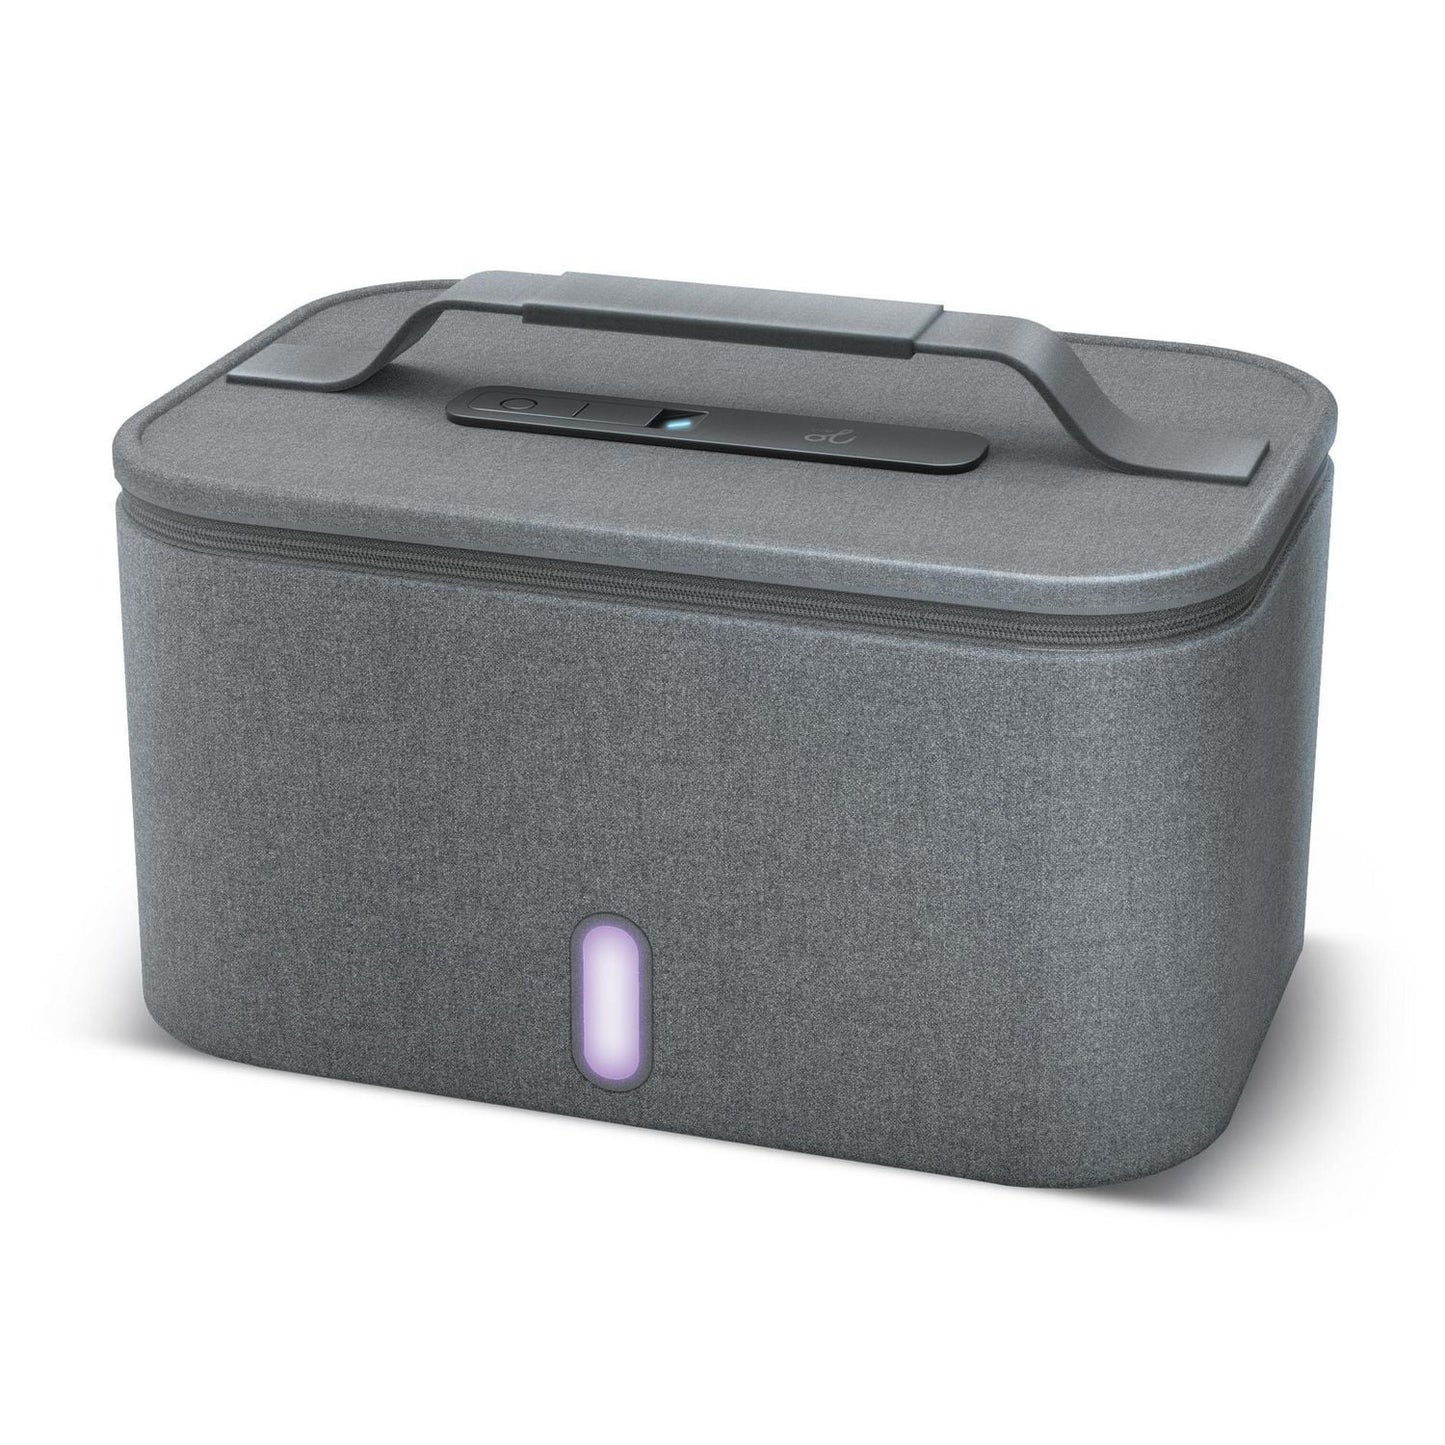 uv-c-portable-sanitizer-collapsible-home-case-olid1092gy-new-gray-1